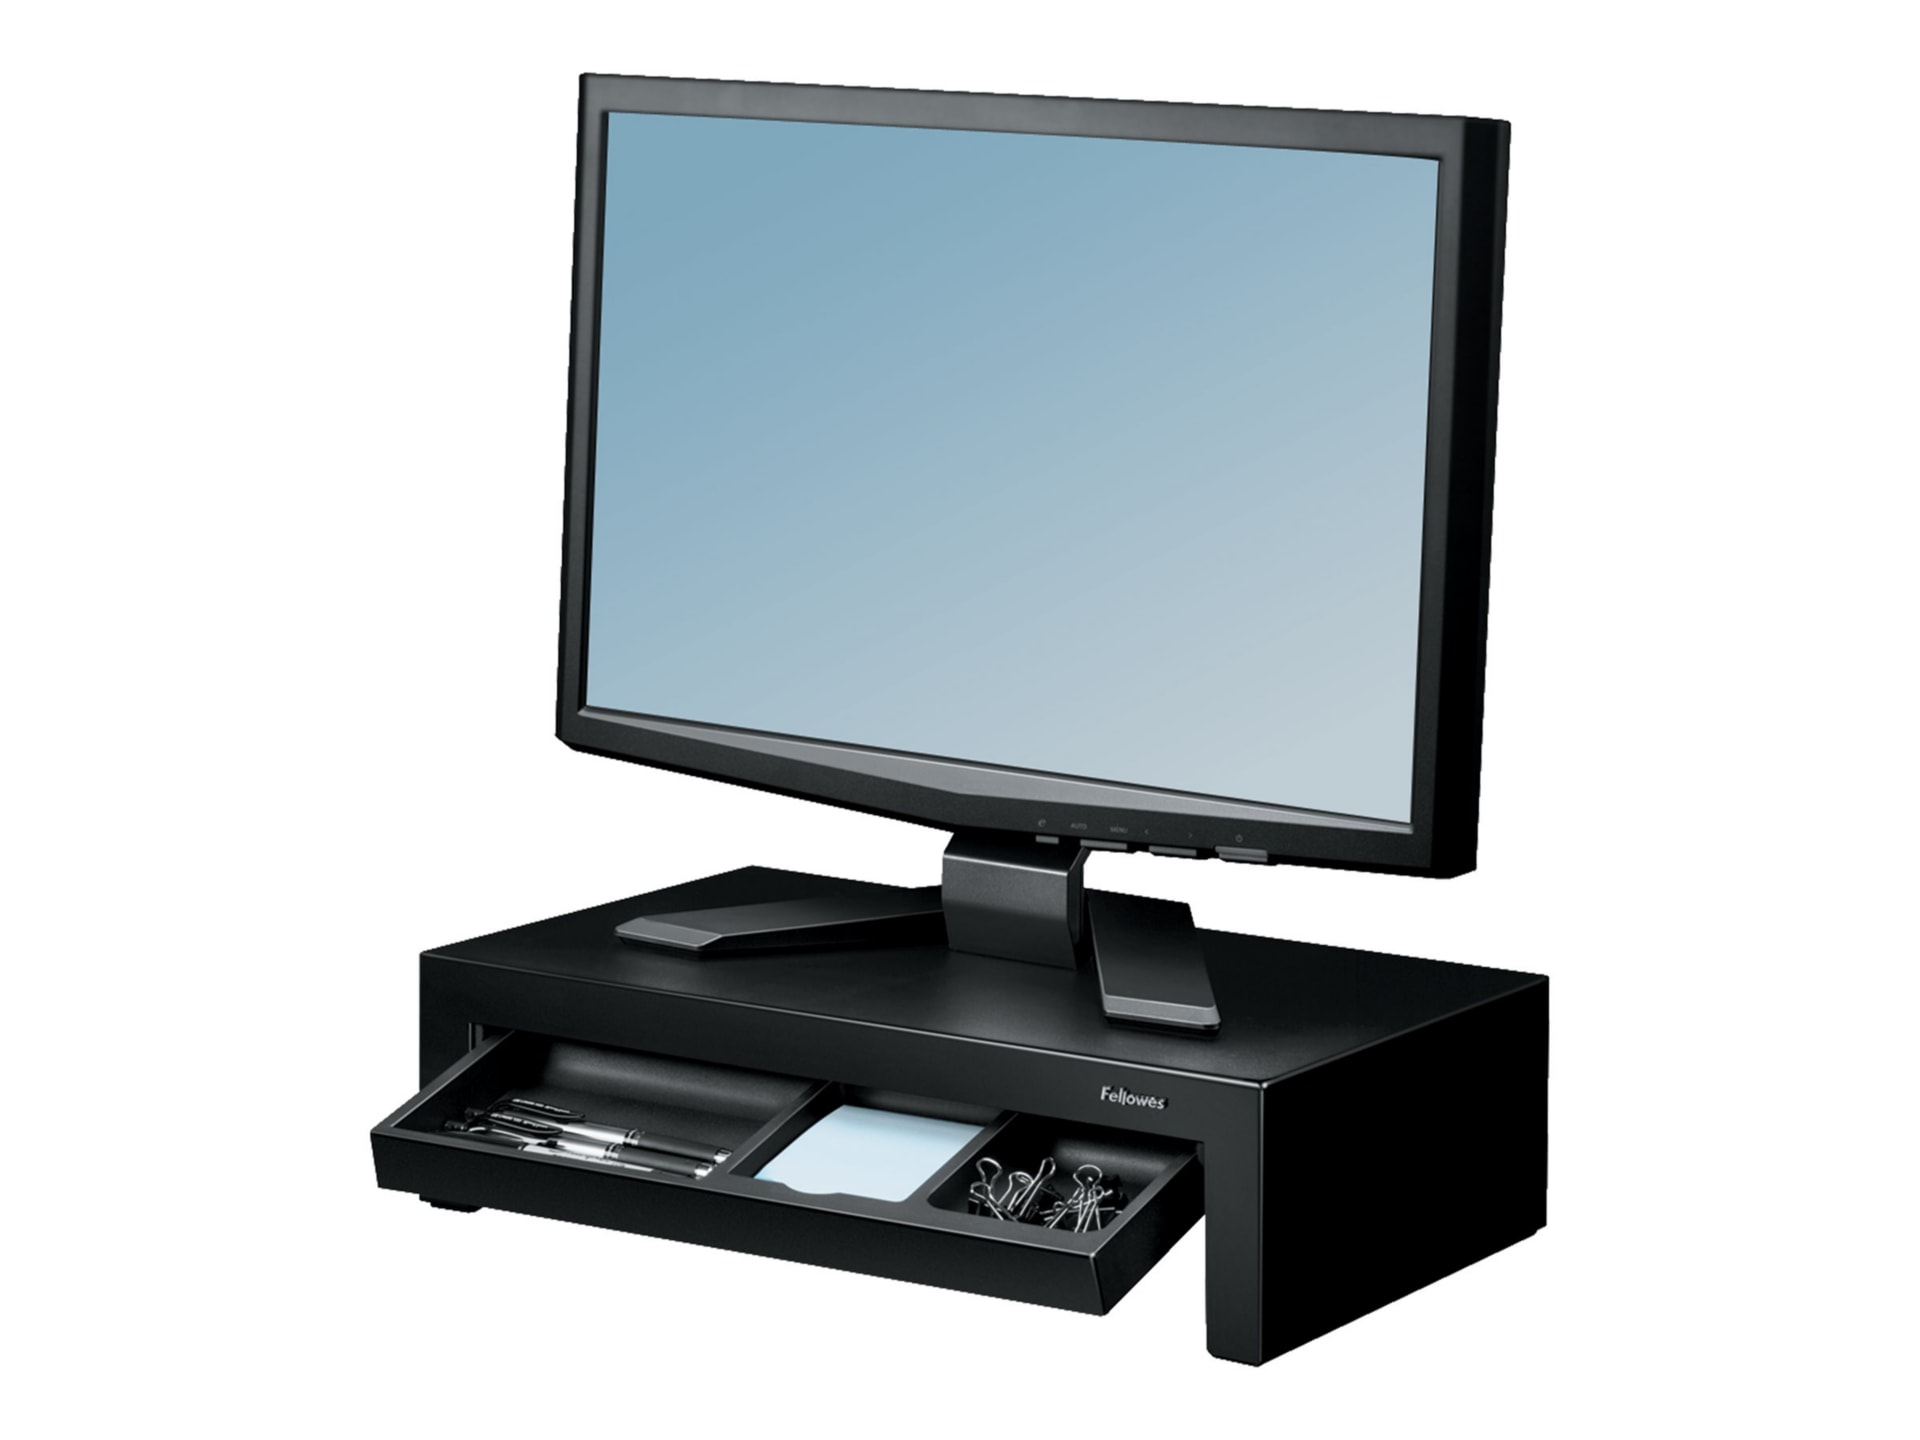 Fellowes Designer Suites Monitor Riser - monitor height-adjustable stand